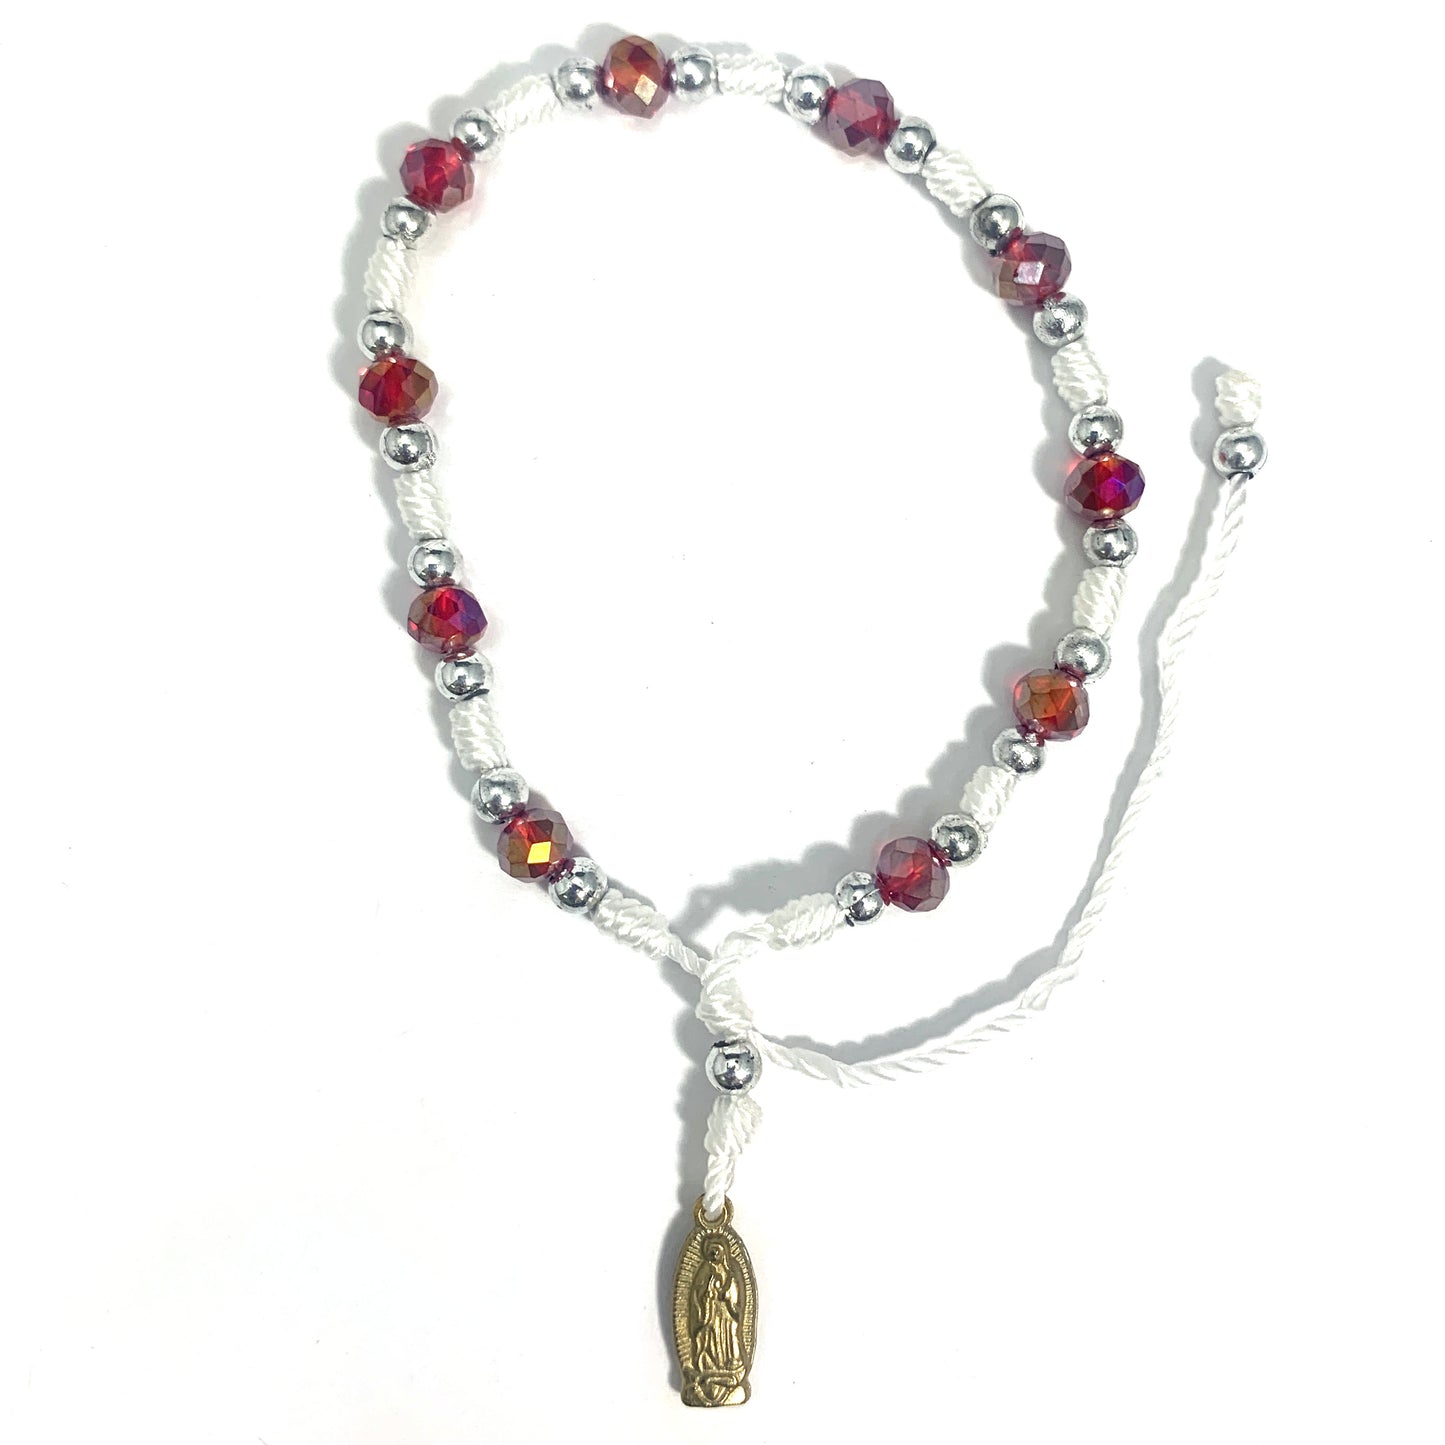 Mexican Guadalupe Decade Rosary Bracelet of Assorted Colors